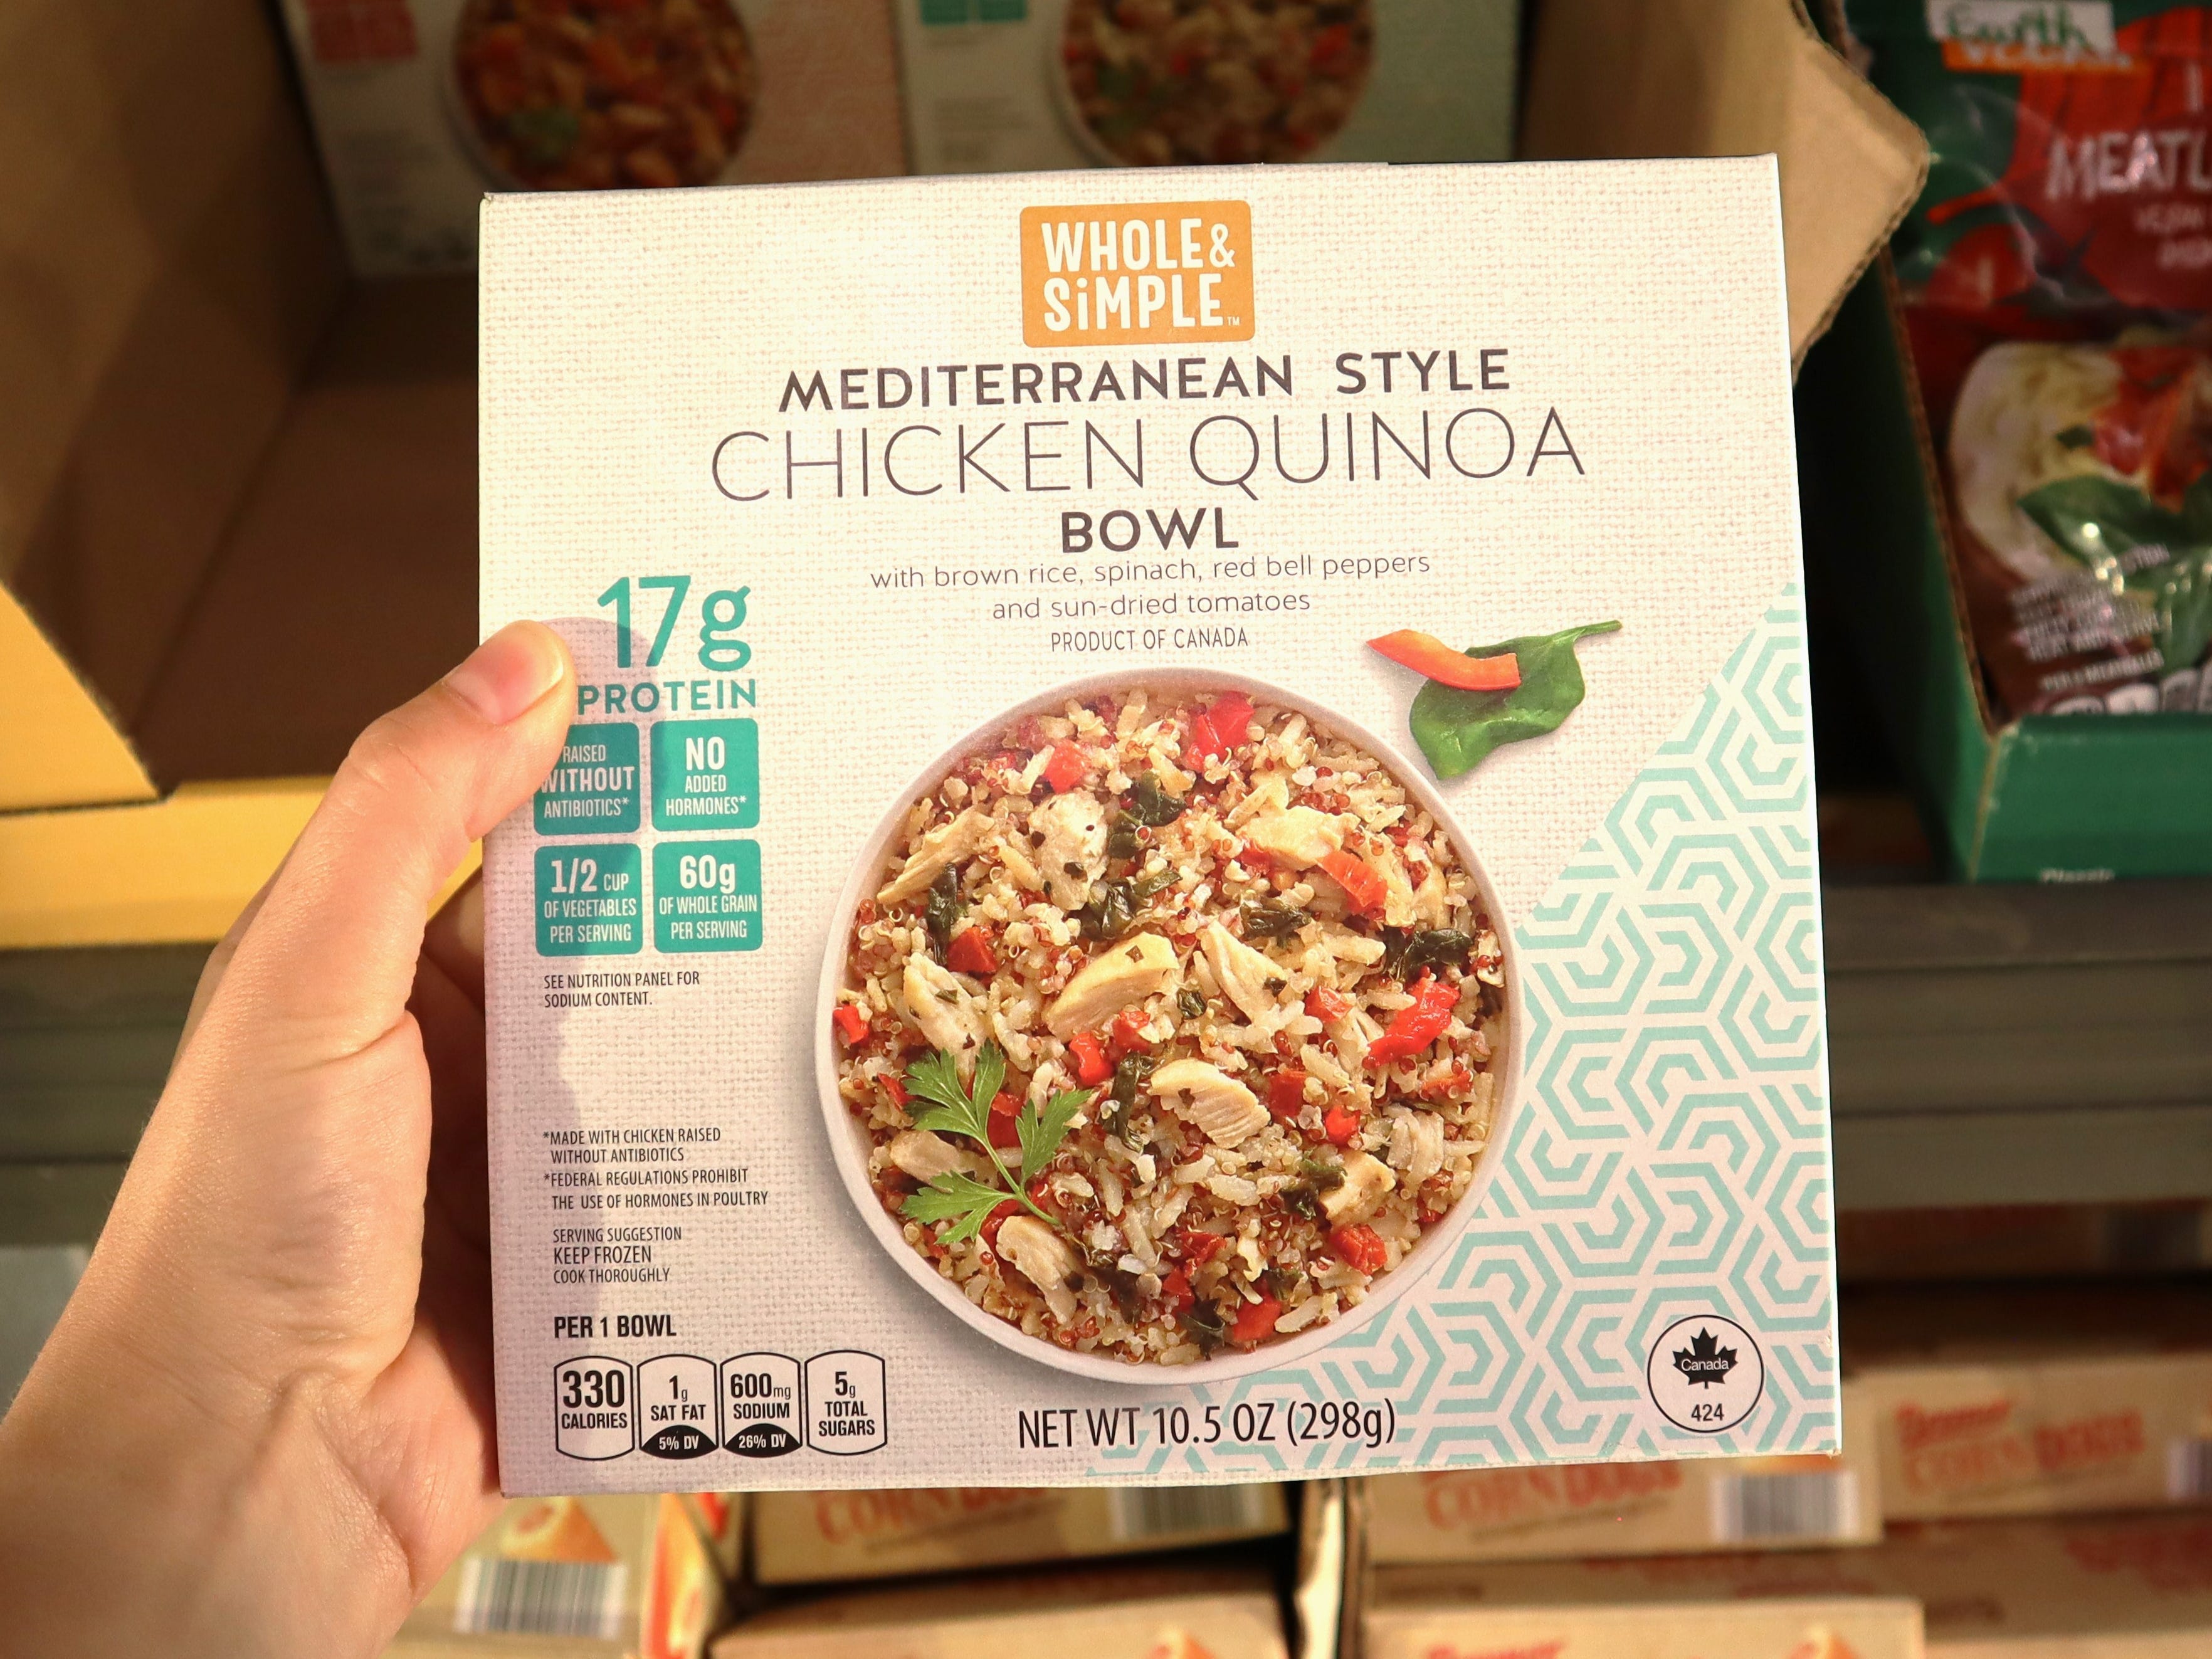 <p>The Whole and Simple Mediterranean chicken quinoa bowls are a delicious Aldi find. The sun-dried tomatoes and spinach really please my palate. </p><p>You can find the Whole and Simple quinoa bowls in Mediterranean and Southwestern flavors in the freezer section. I'll often put them in a small <a href="https://www.insider.com/things-to-get-for-lunch-at-trader-joes-2019-8">lunch</a> box with an ice pack to keep them cool.</p><p>I also like that the quinoa bowls contain 16 to 17 grams of protein, so they'll keep you full. You can find the Whole and Simple quinoa bowls for $3.50 each.</p>